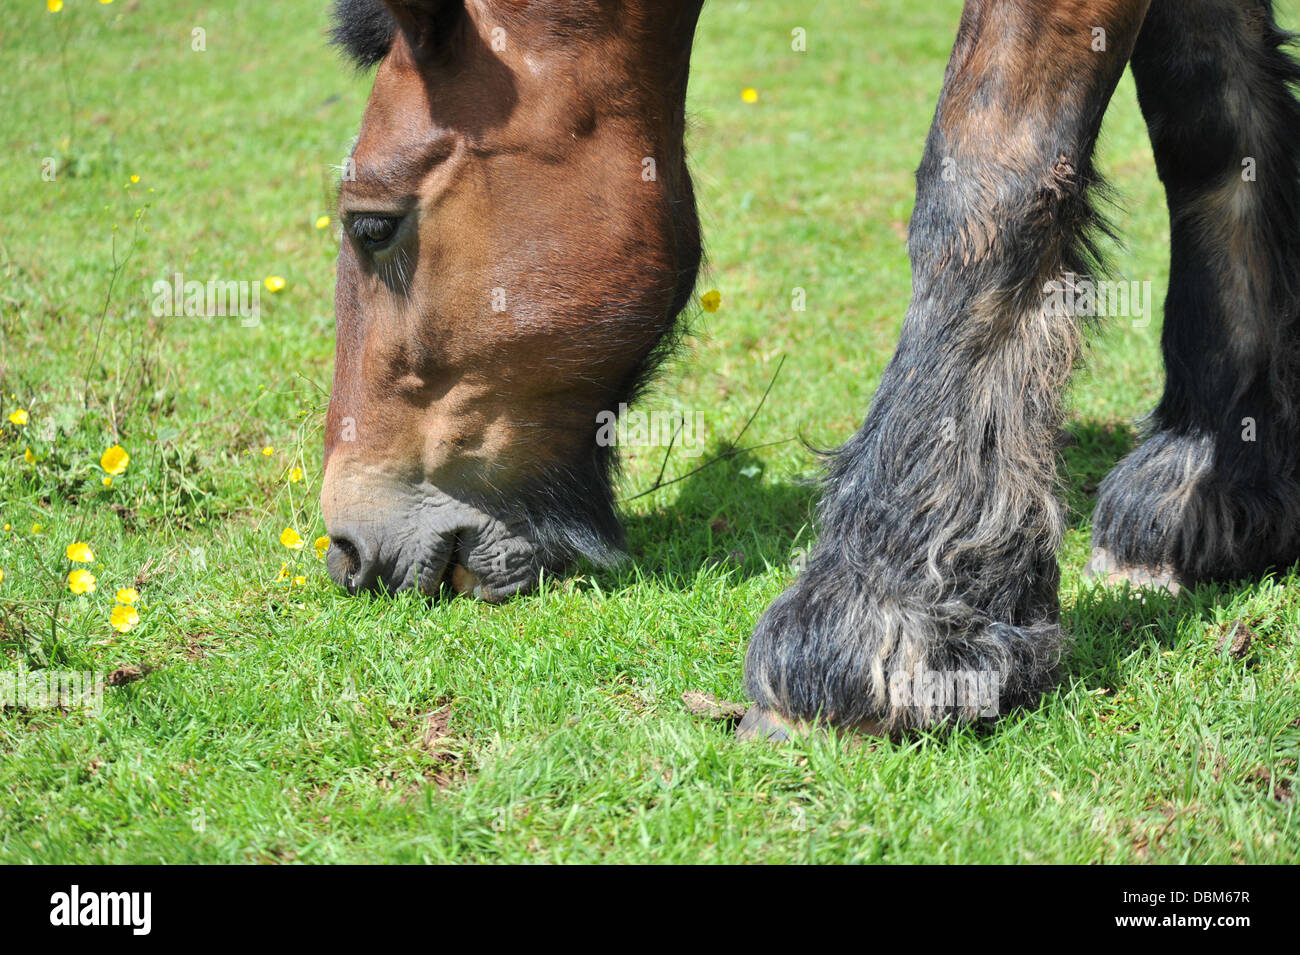 horse eating grass in his paddock Stock Photo